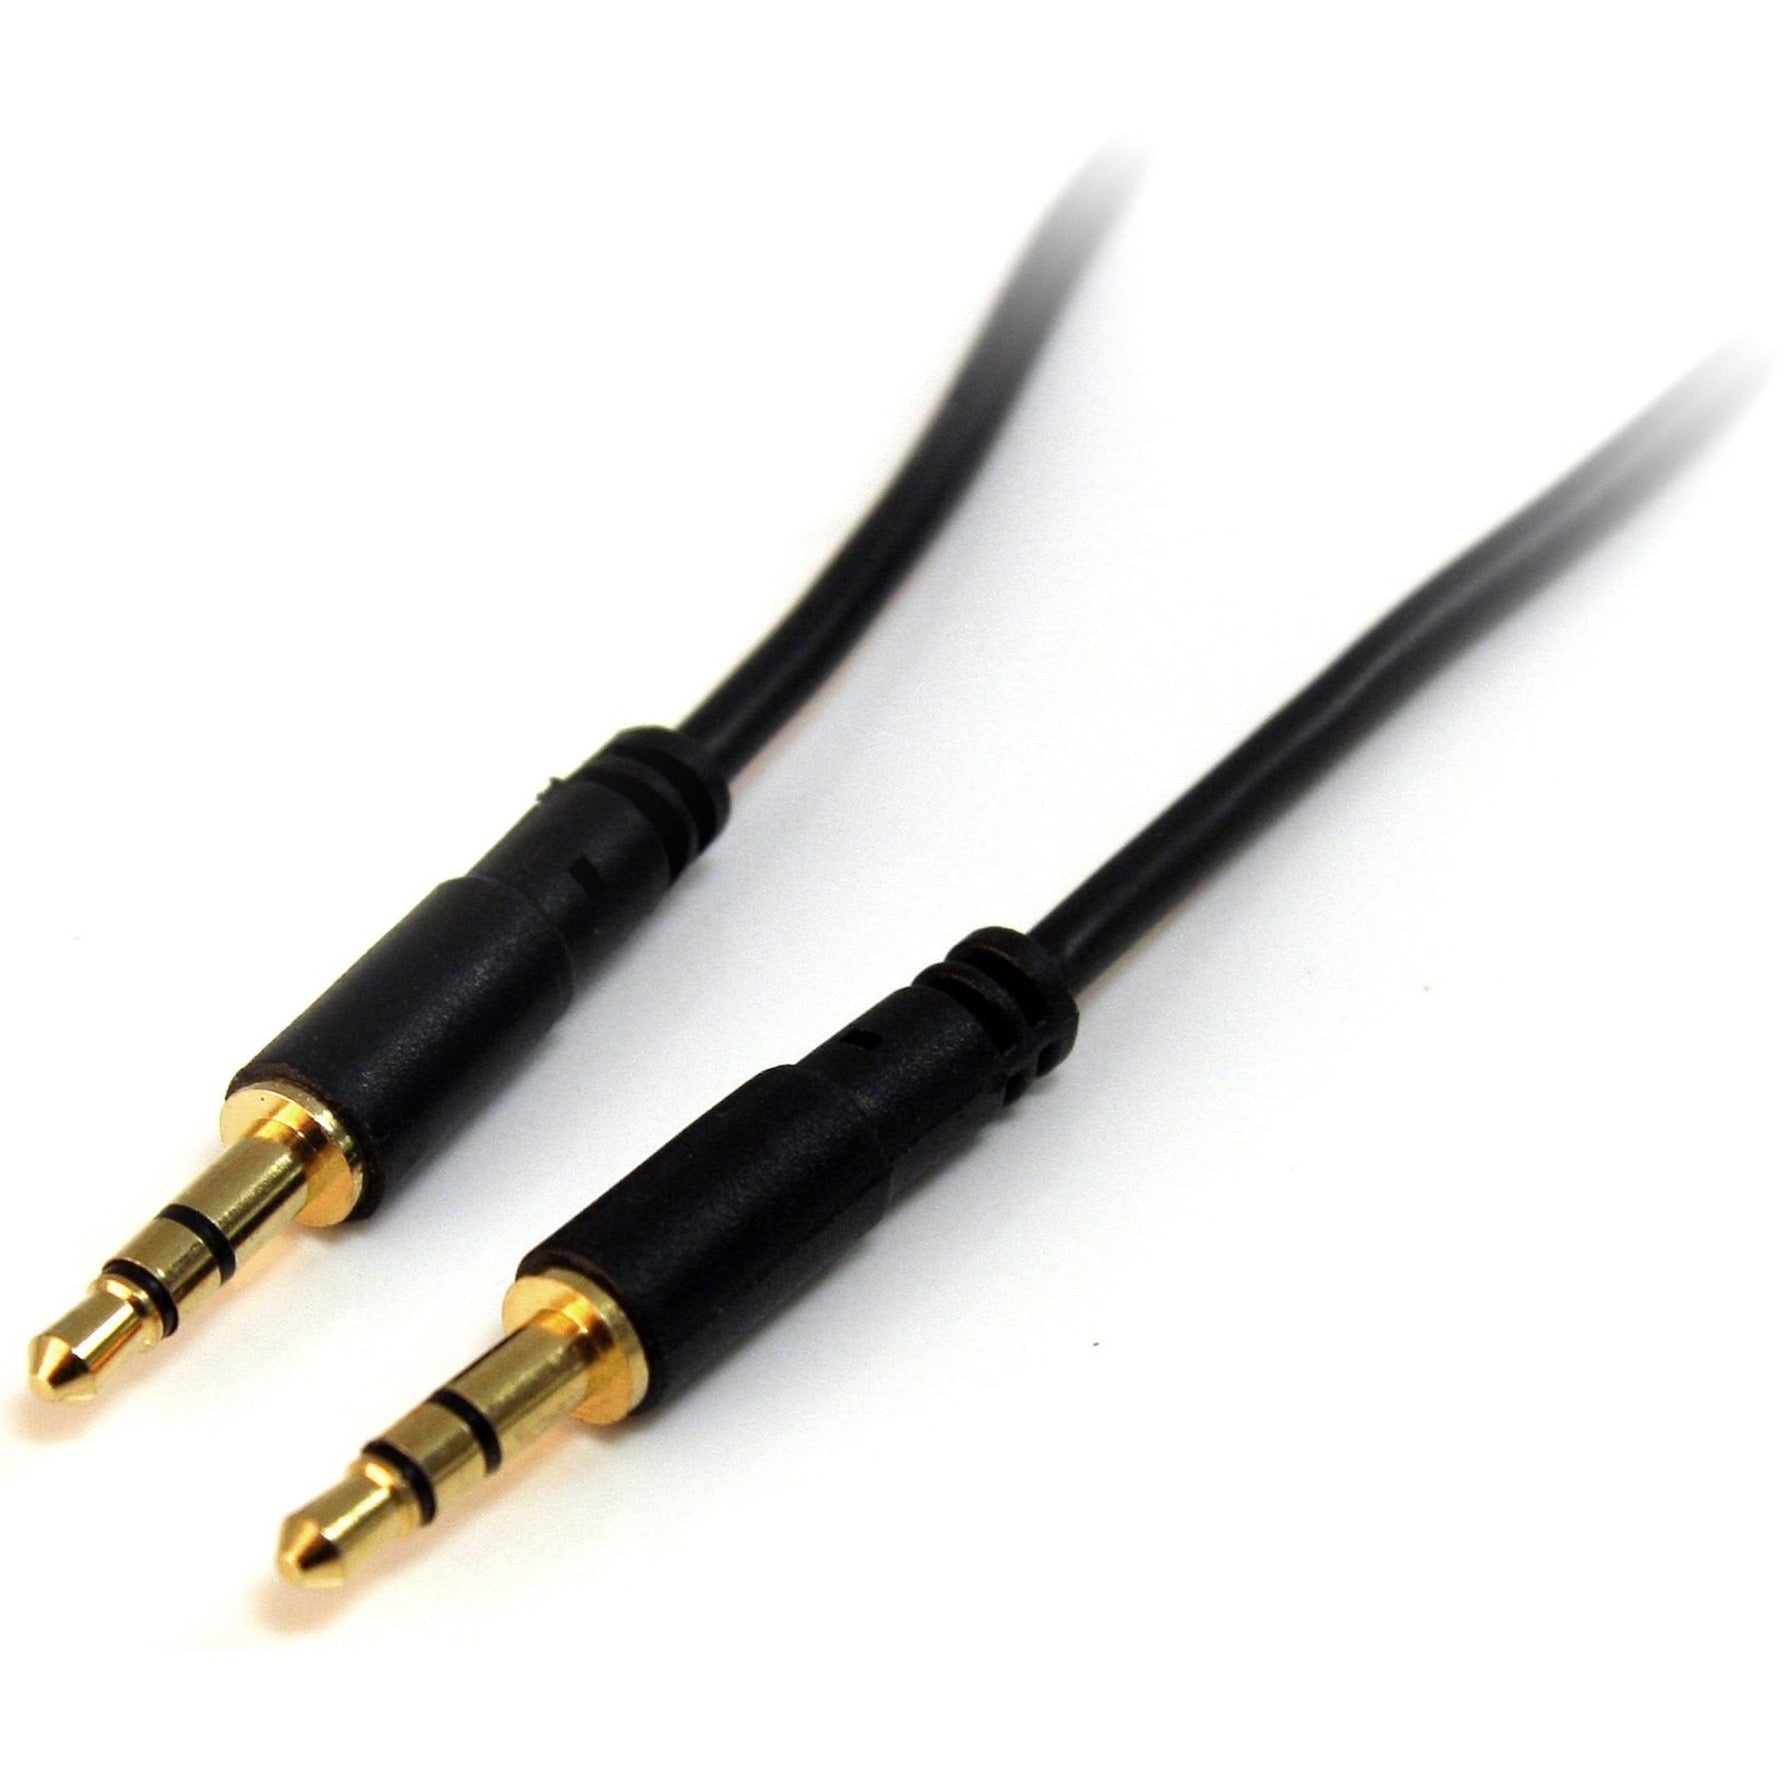 StarTech.com MU3MMS 3 ft Slim 3.5mm Stereo Audio Cable - M/M, Gold-Plated Connectors, Strain Relief, Black